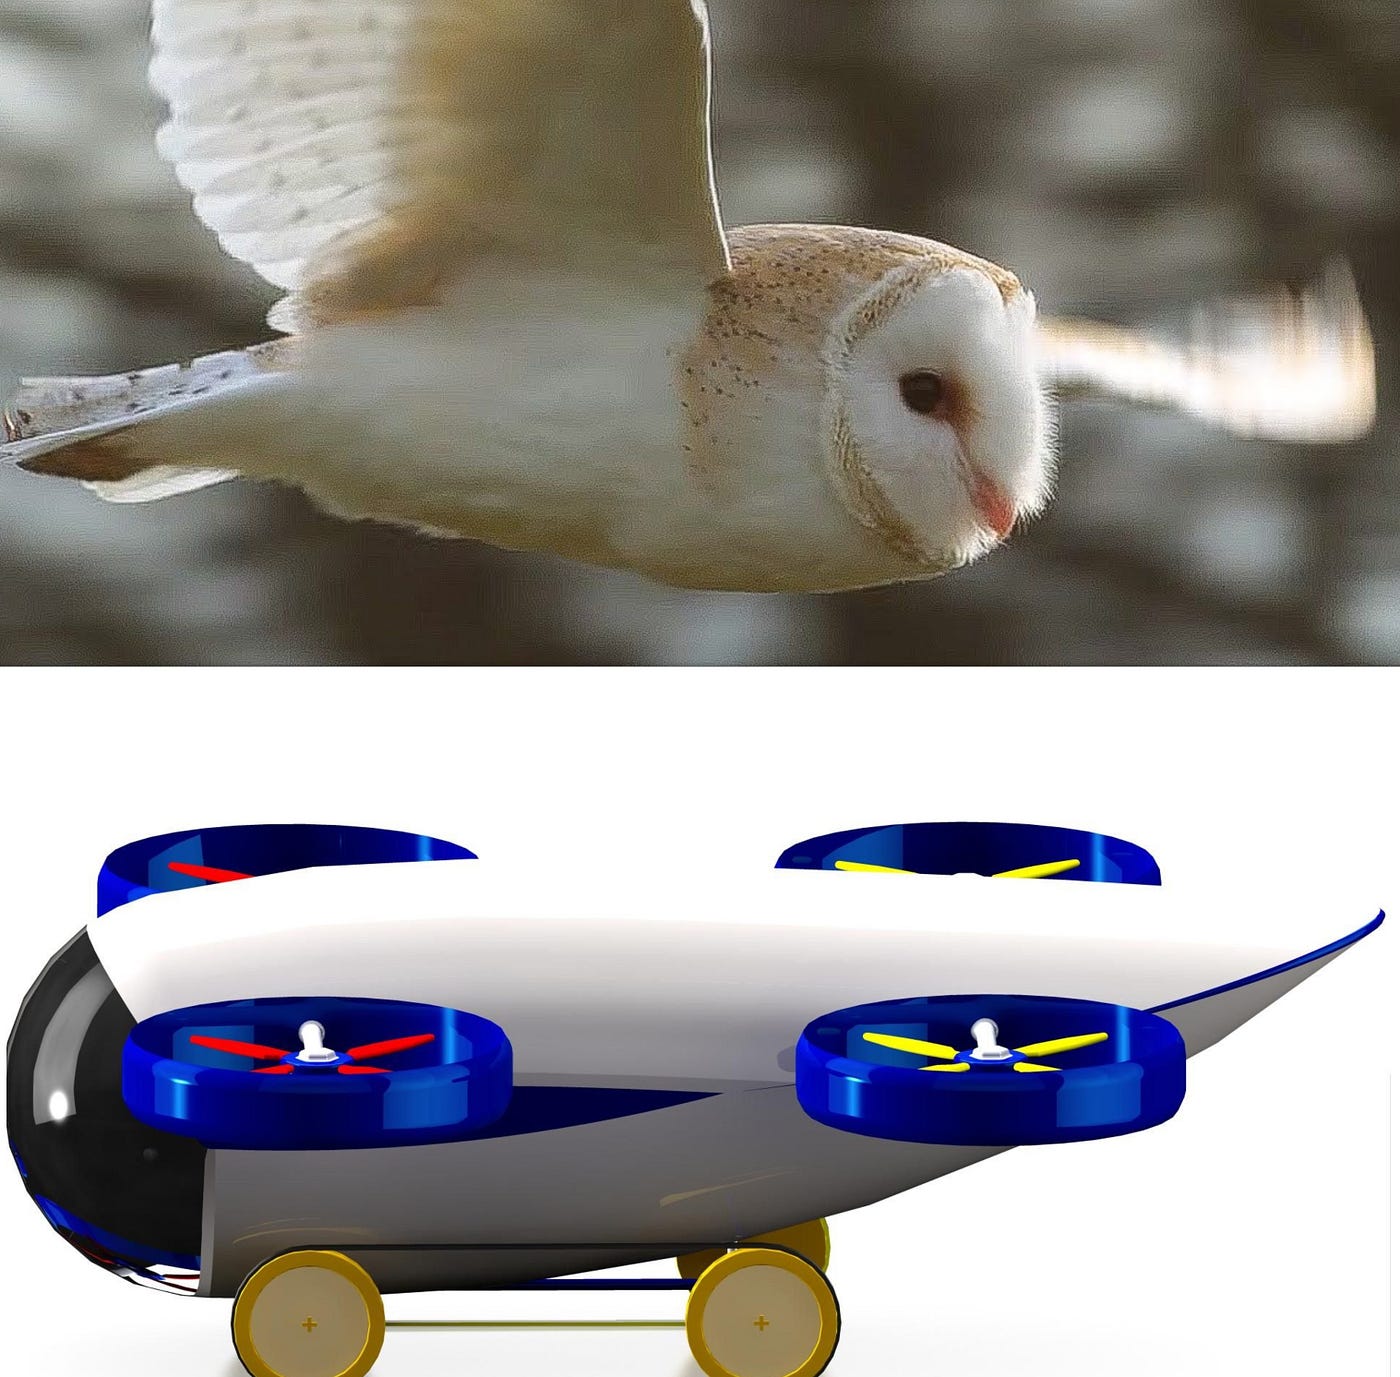 How an owl inspired me to design a drone? | by Deepak Harish | Medium